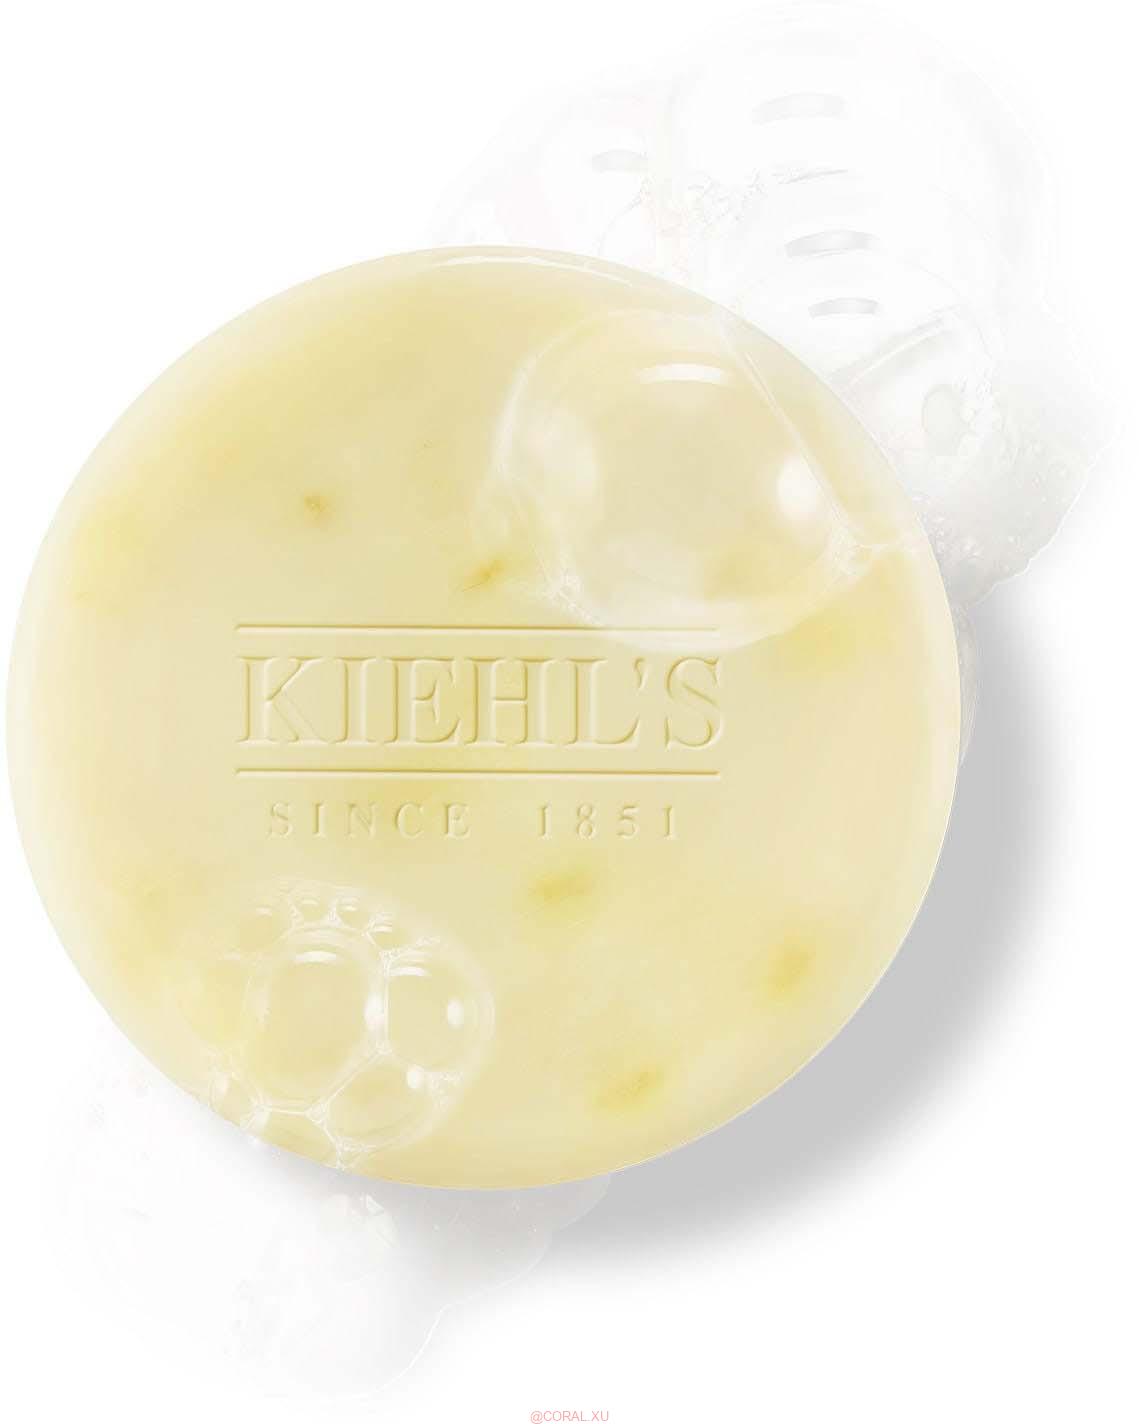 00002299 - Kiehl’s Calendula Calming & Soothing Concentrated Facial Cleansing Bar Review